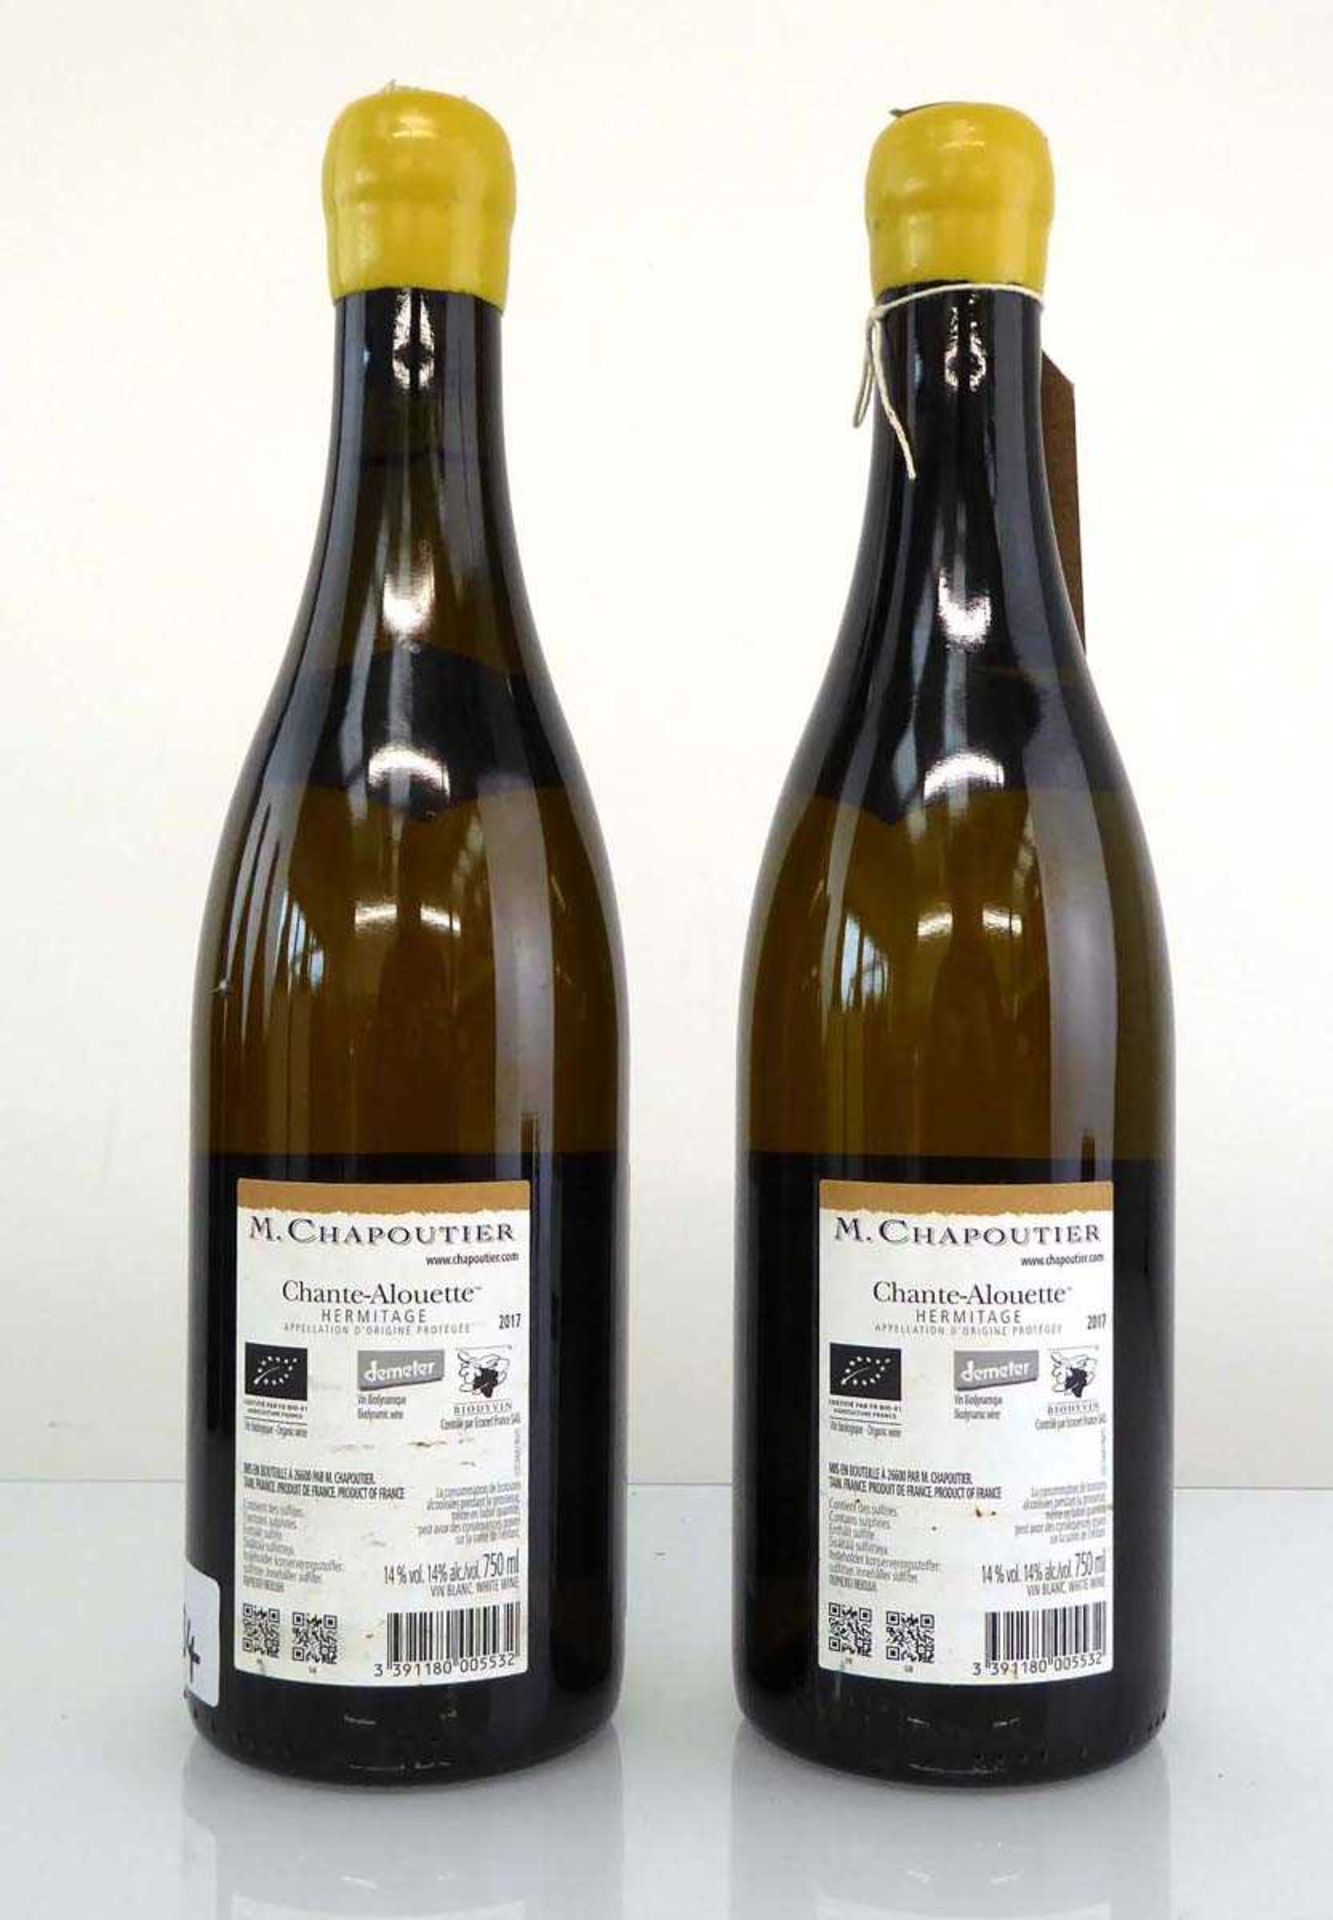 2 bottles of M. Chapoutier Hermitage Chante-Alouette 2017 Rhone, France - Image 2 of 2